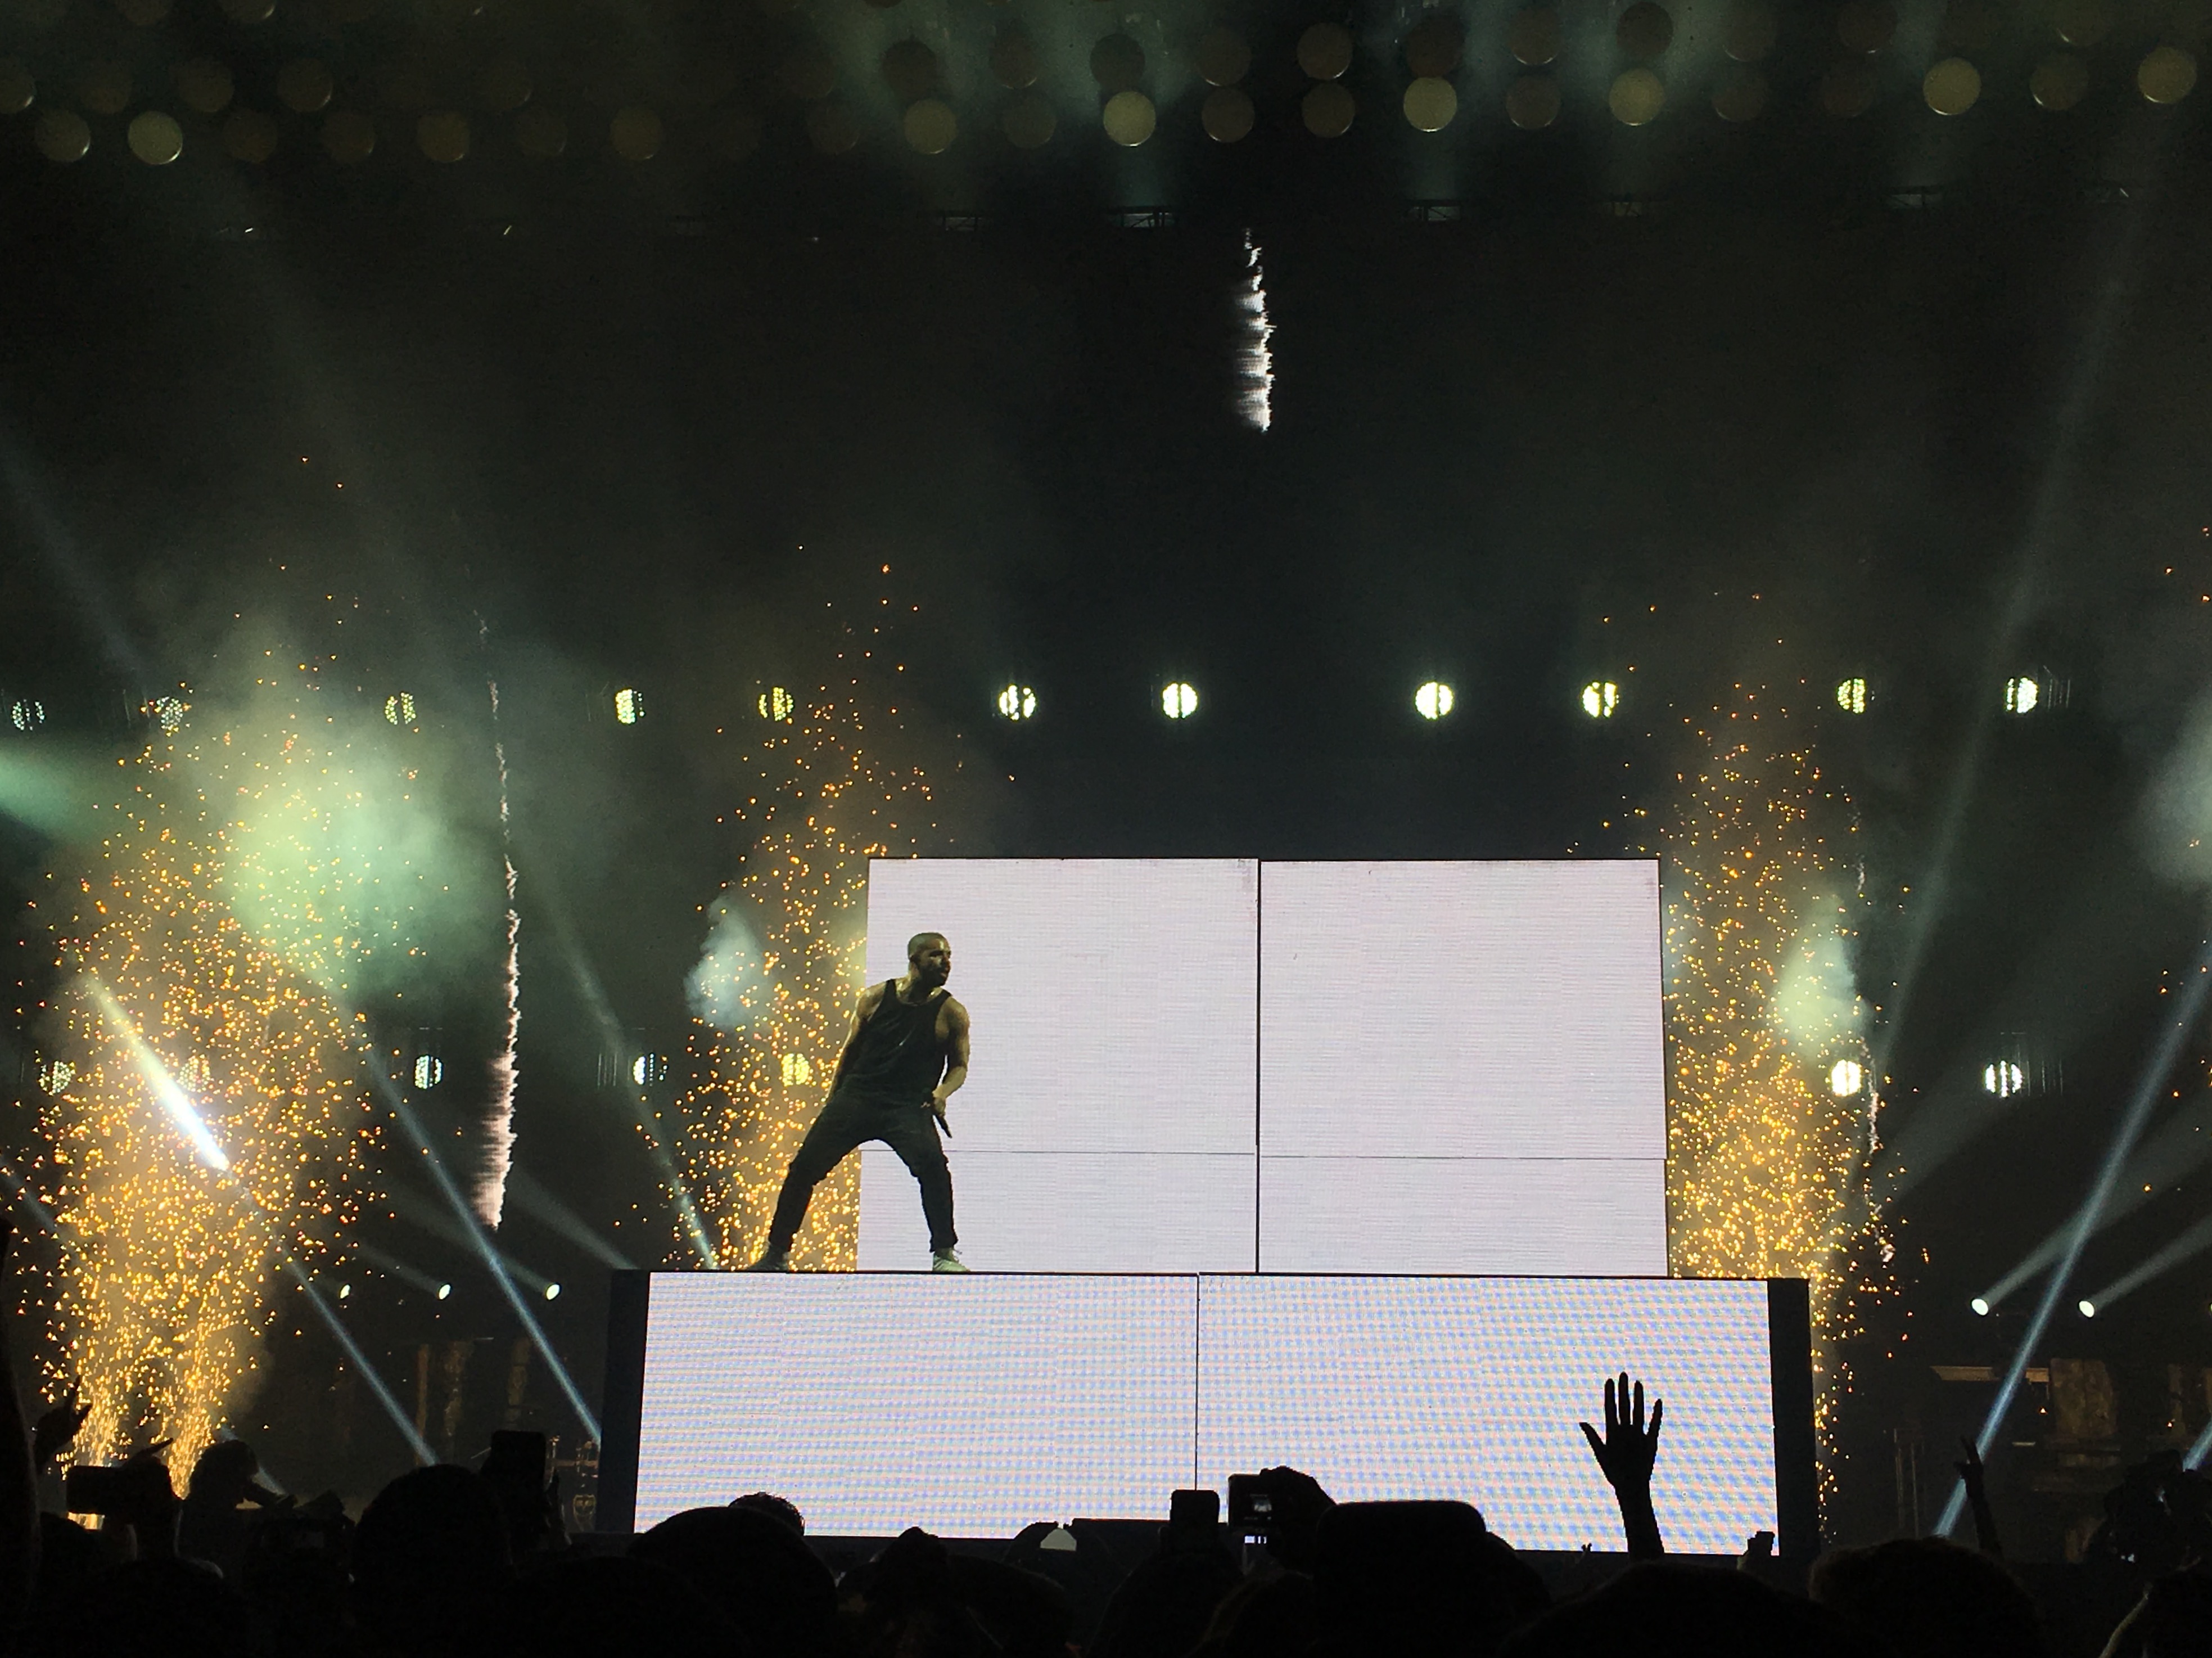 Drake takes over the weekend with great music and energy